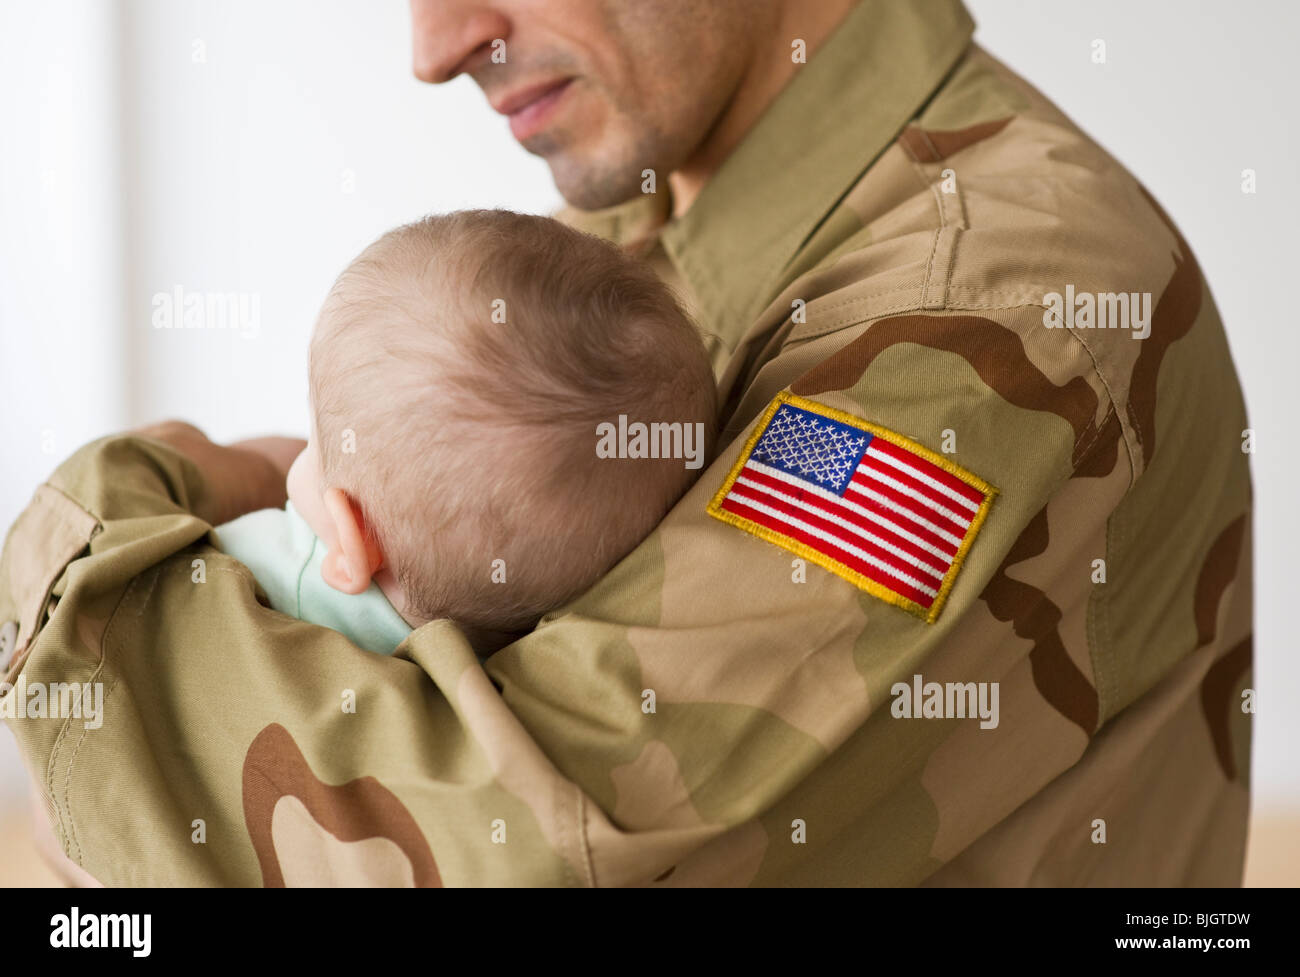 Soldier holding baby Stock Photo